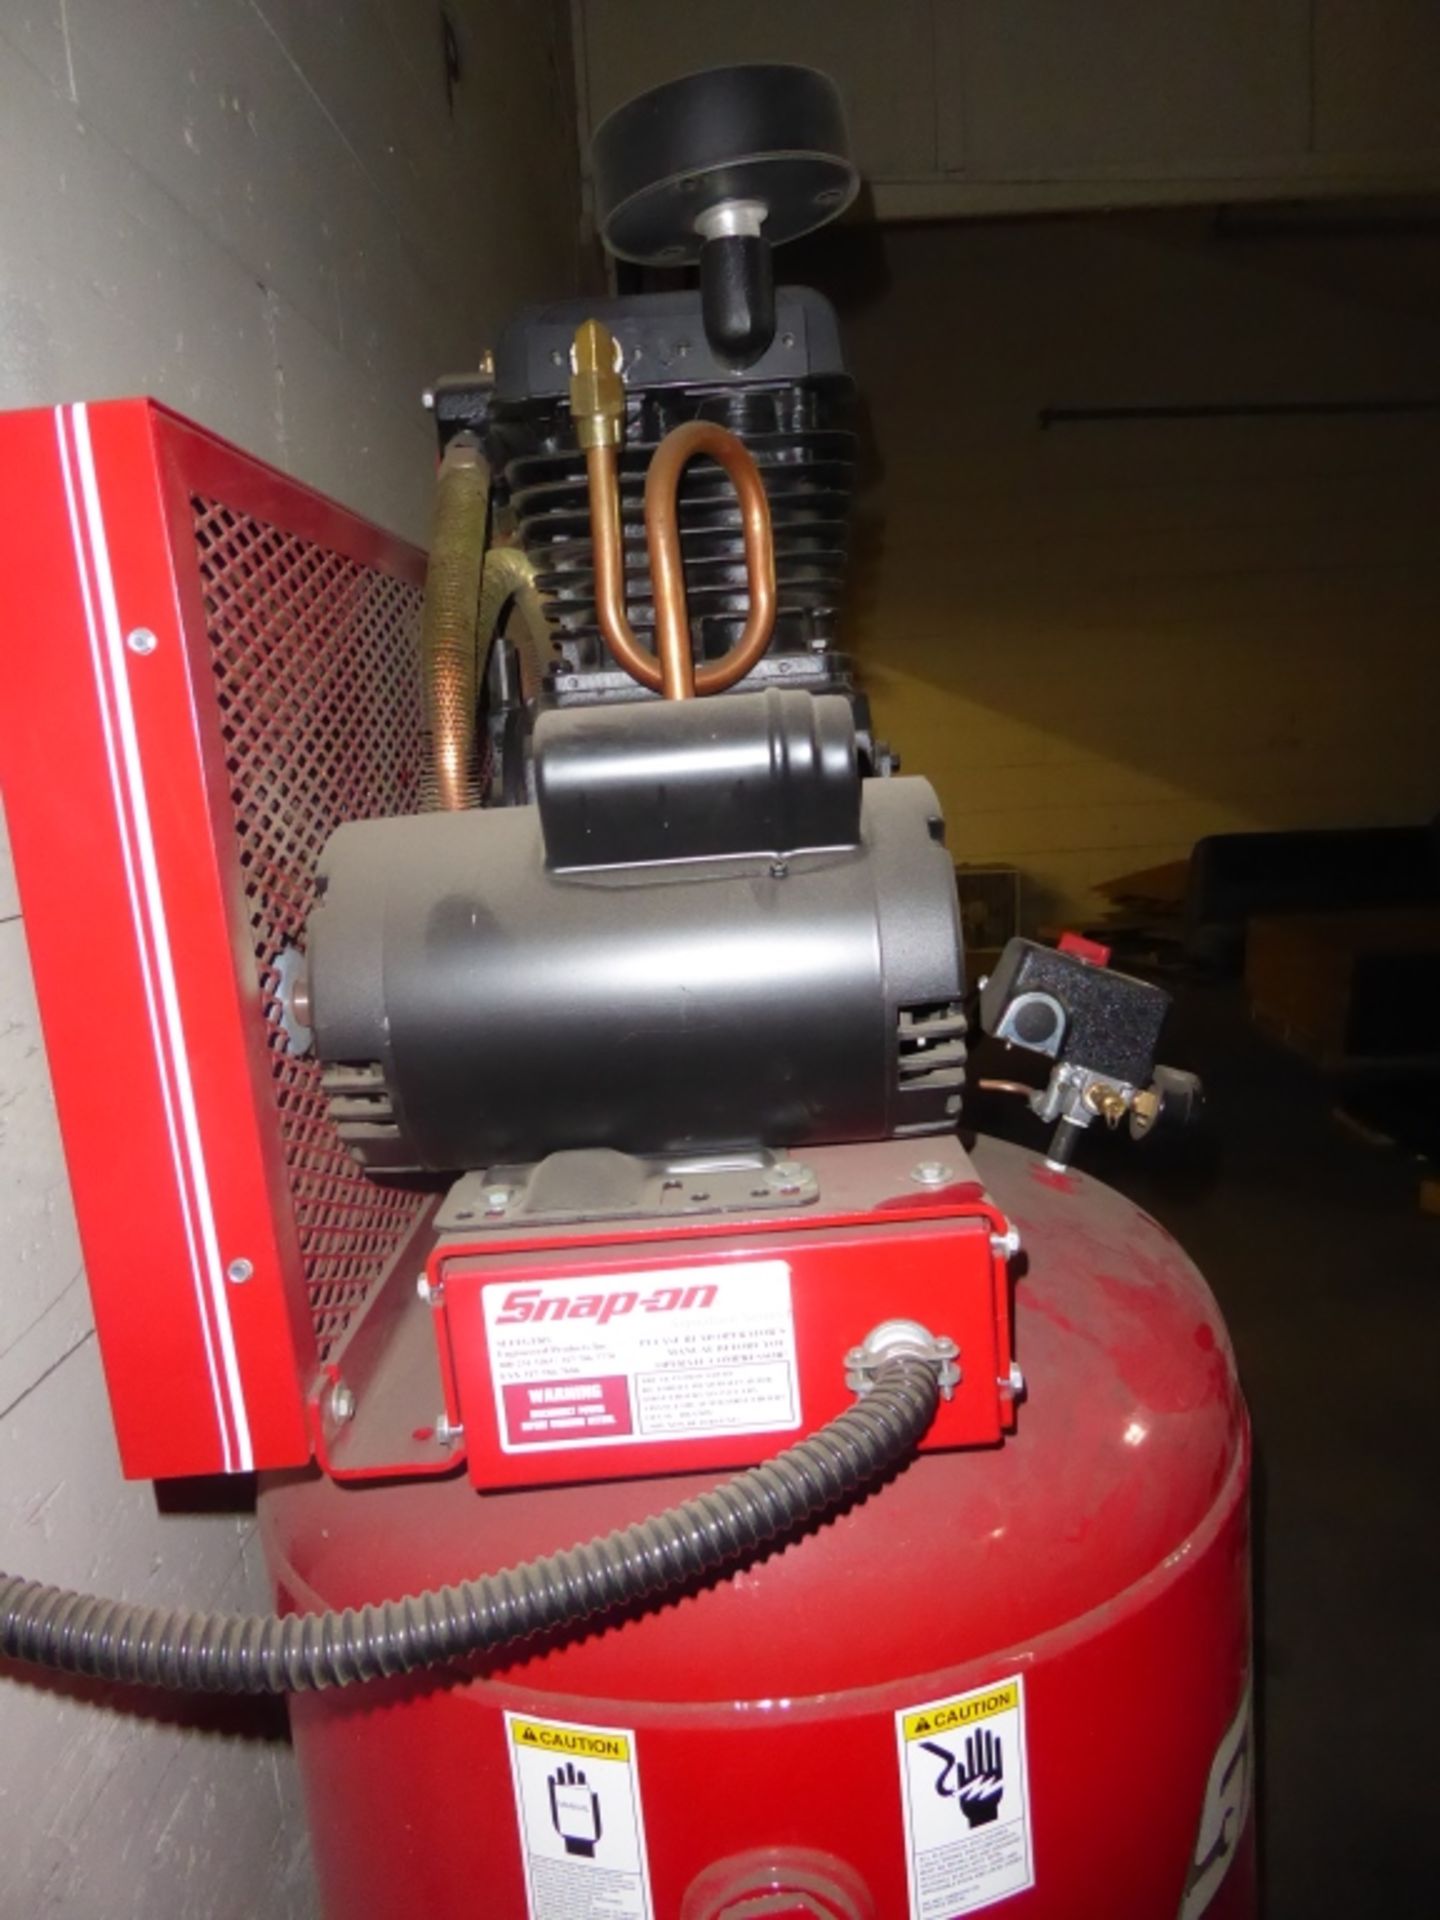 Snap On 5 HP 70 Gallon Air Compressor Nearly new air compressor which retails at $3,695.00 on Snap - Image 2 of 4